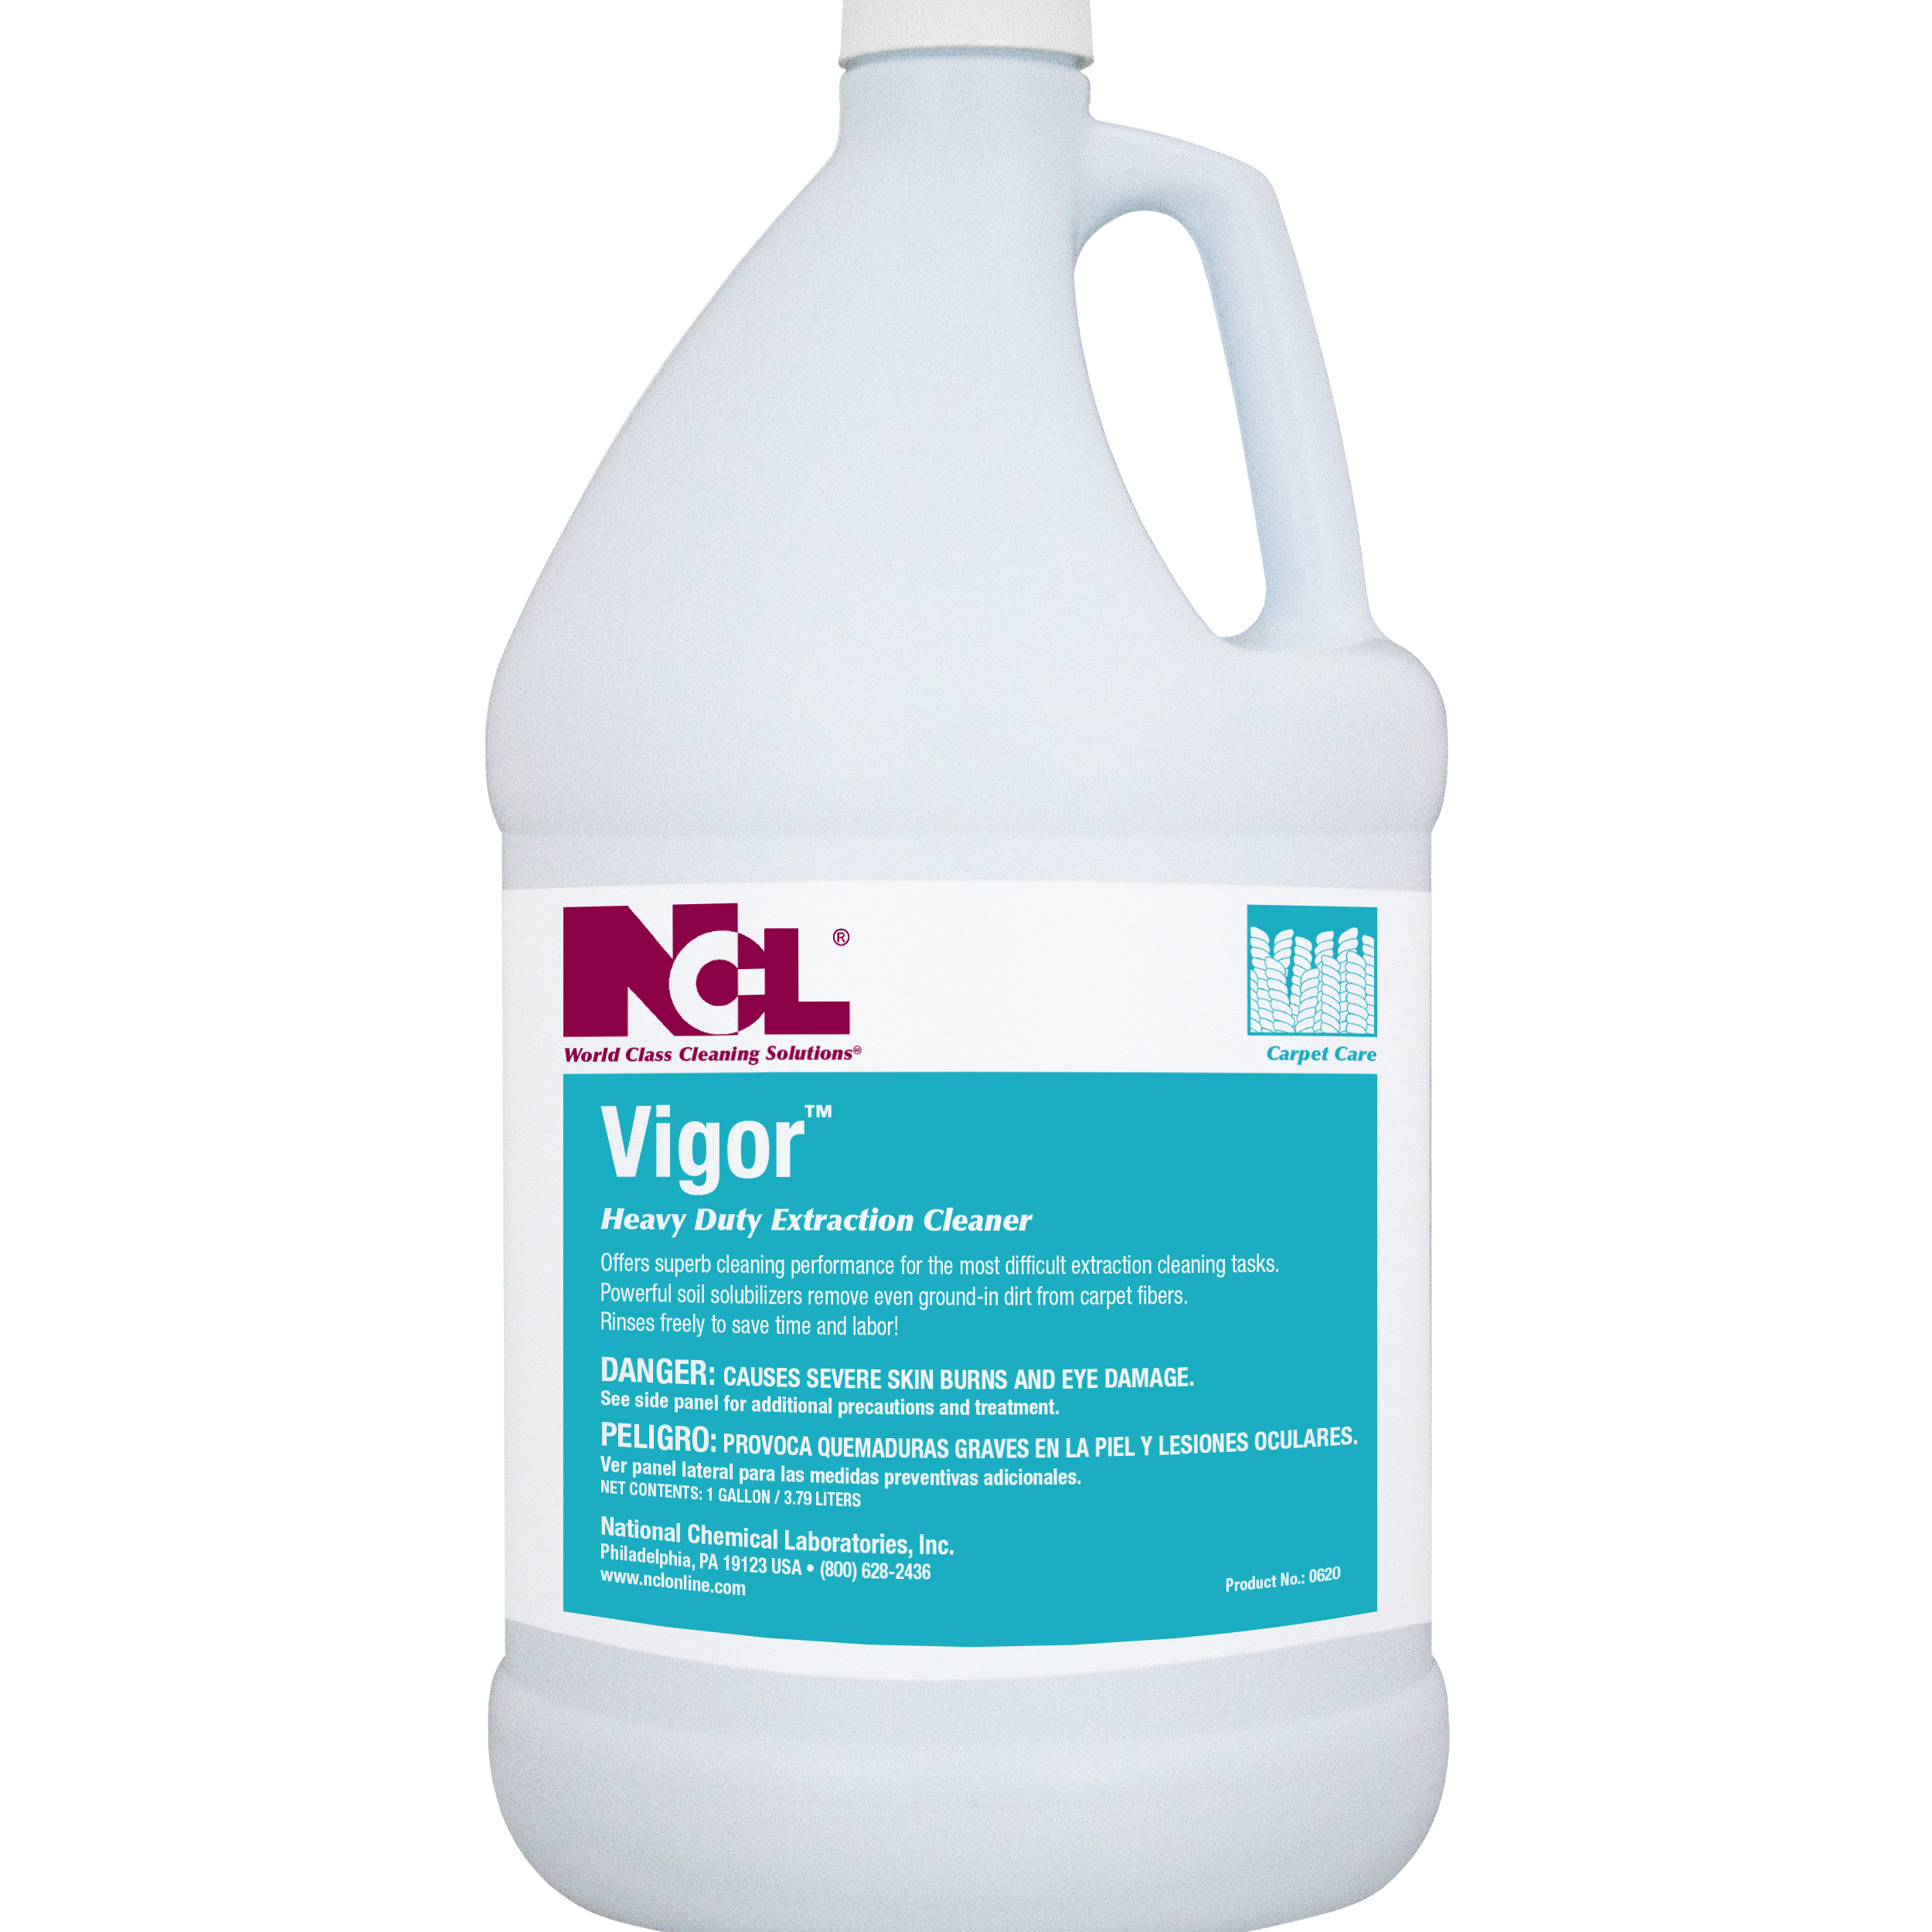  VIGOR  Heavy Duty Extraction Cleaner 4/1 Gal. Case (NCL0620-29) 